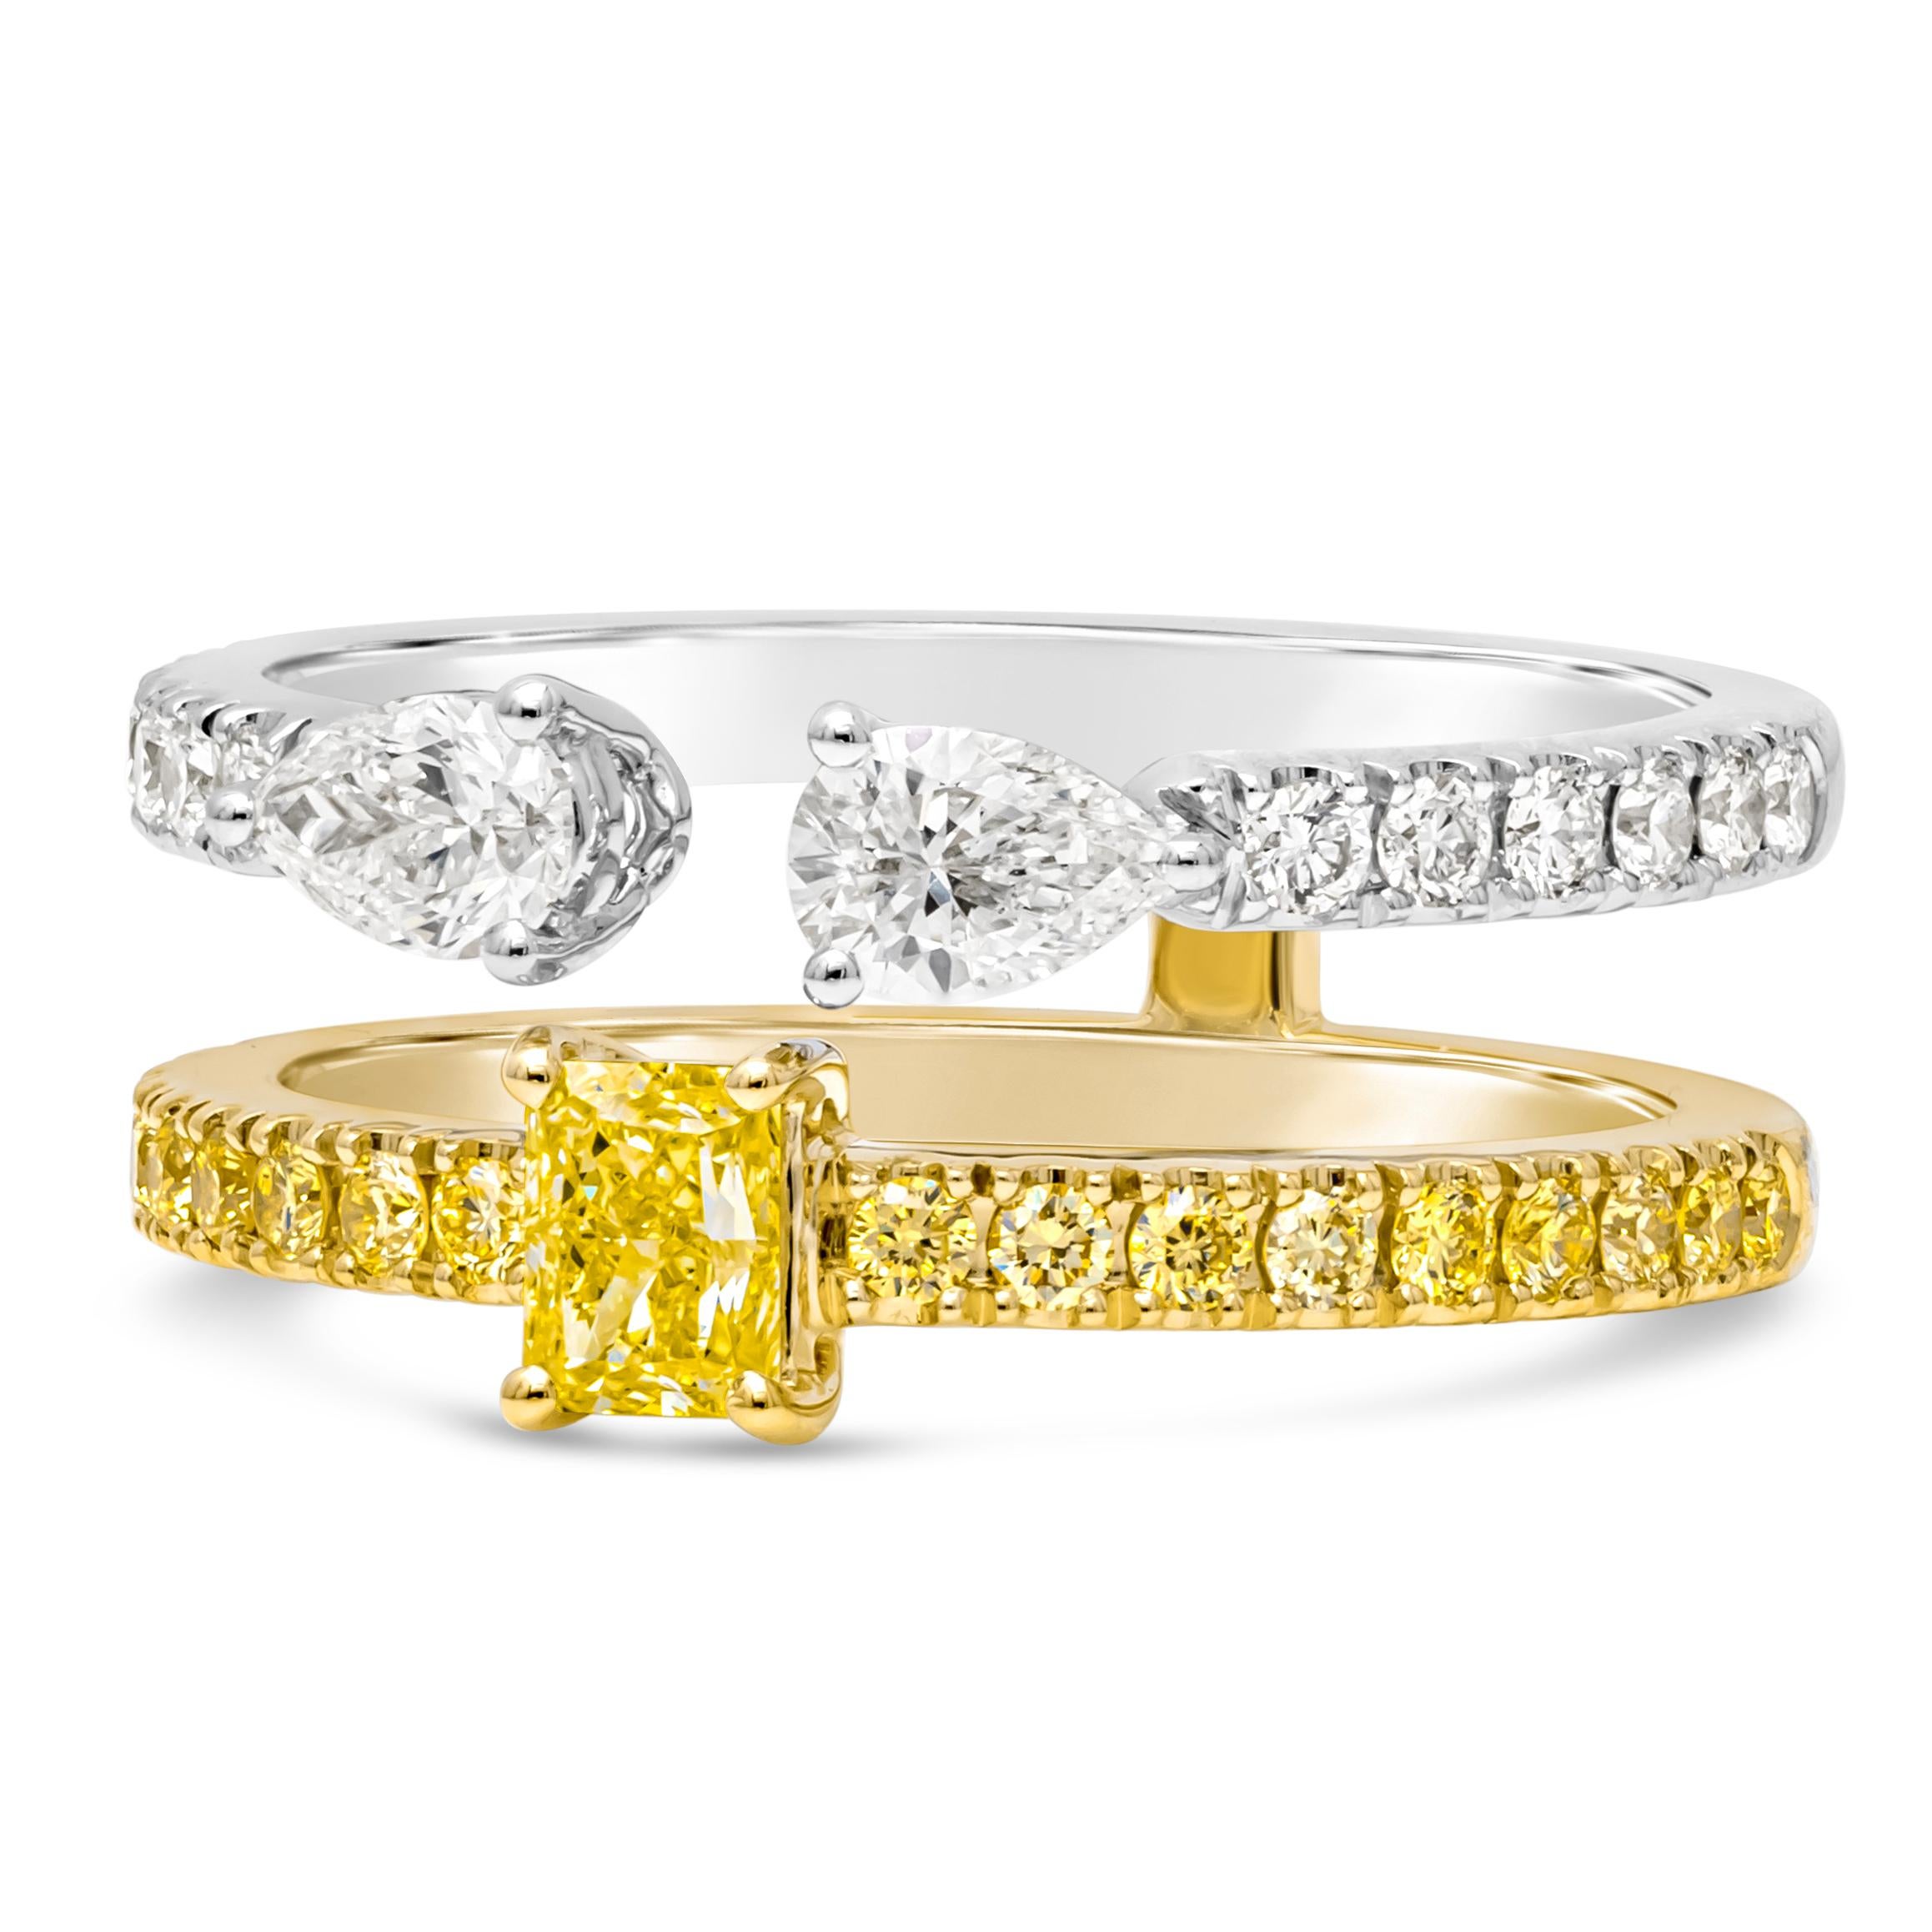 This exquisite double band fashion ring features a stunning combination of elegance and vibrancy. One band showcases fancy color emerald cut diamond center stone, accented with pave round fancy color diamonds, set in a 18k yellow gold. While the